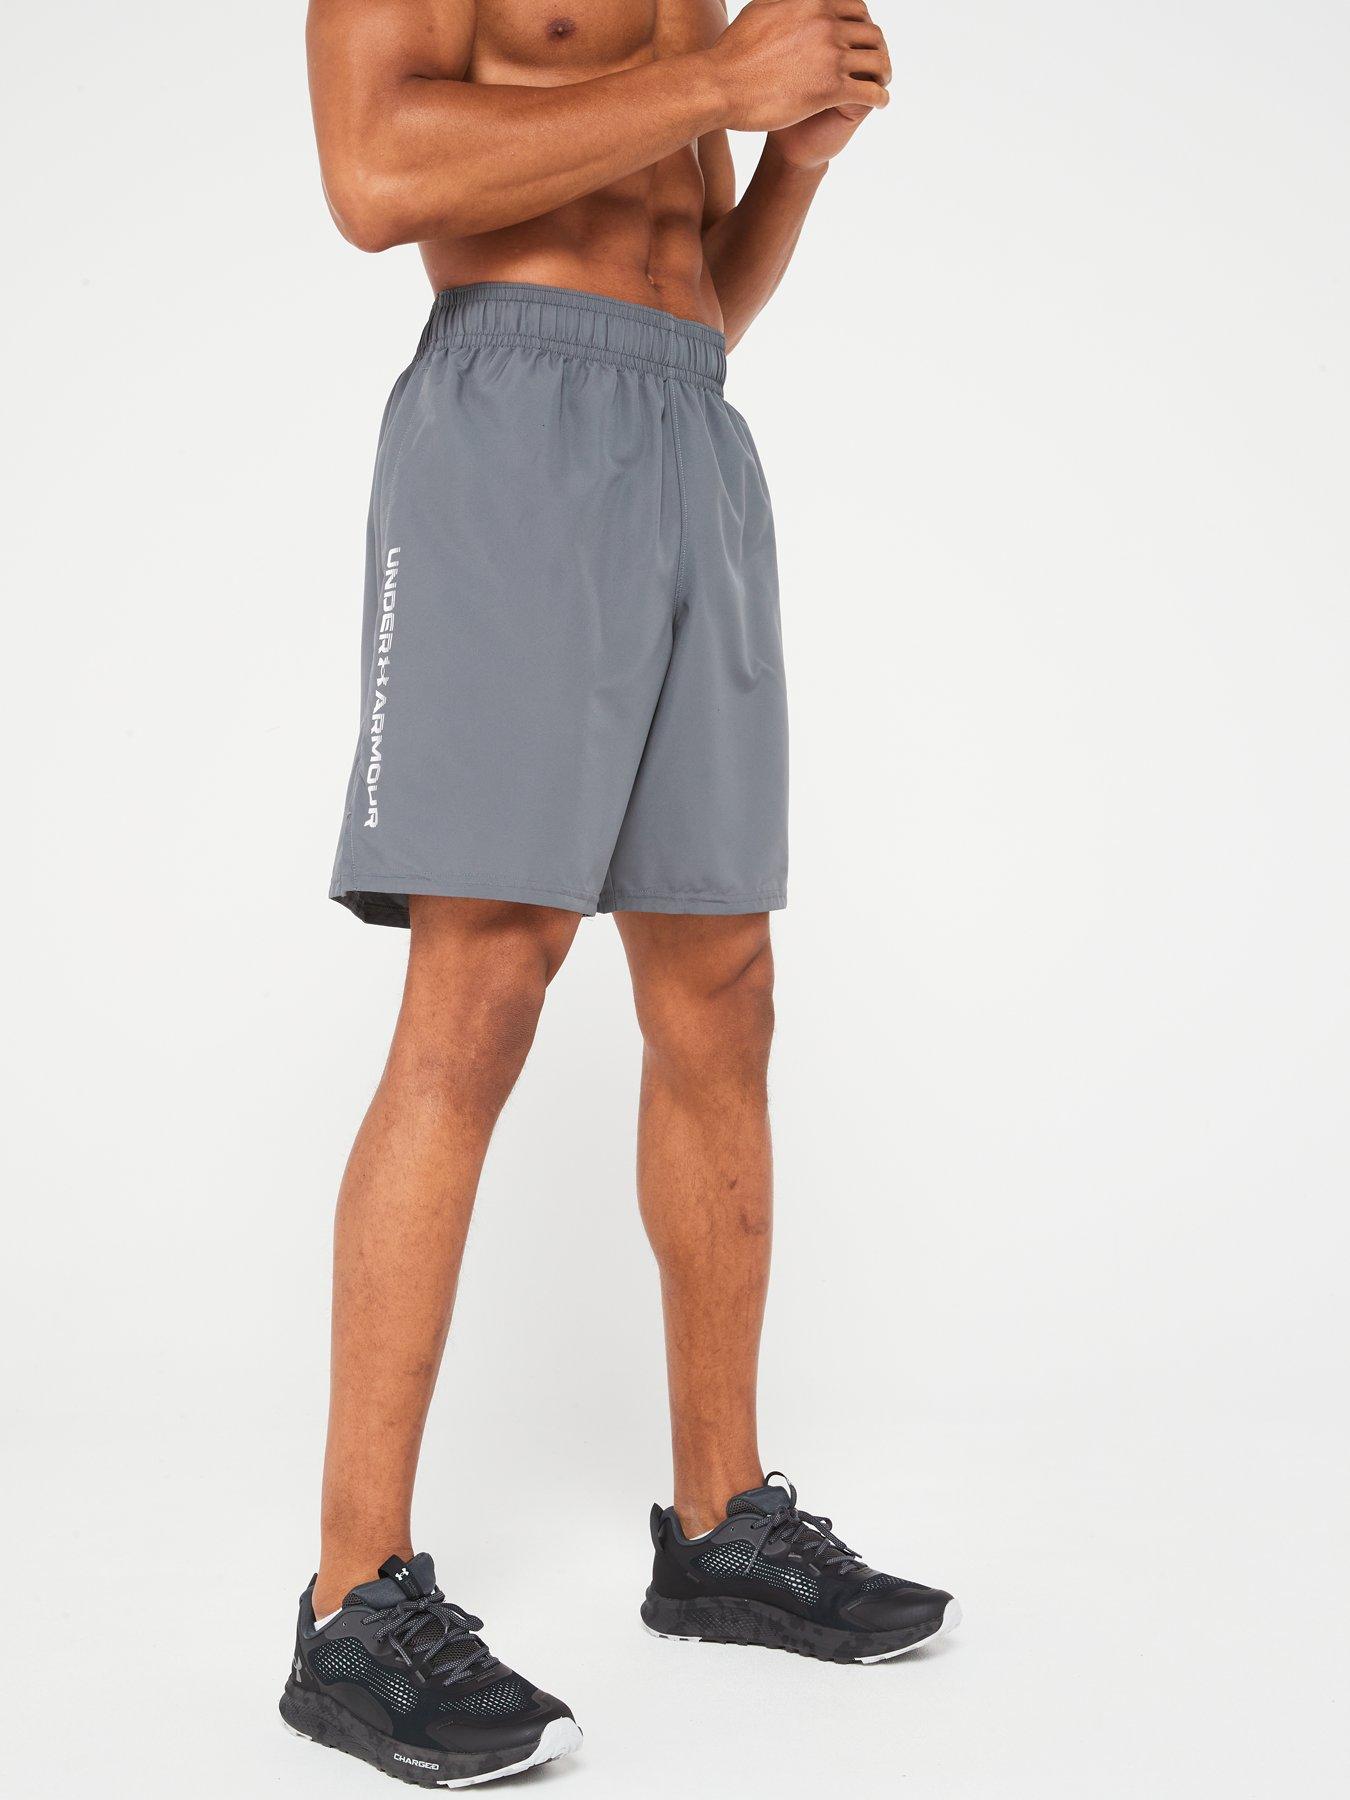 Mens Under Armour Shorts, Next Day delivery